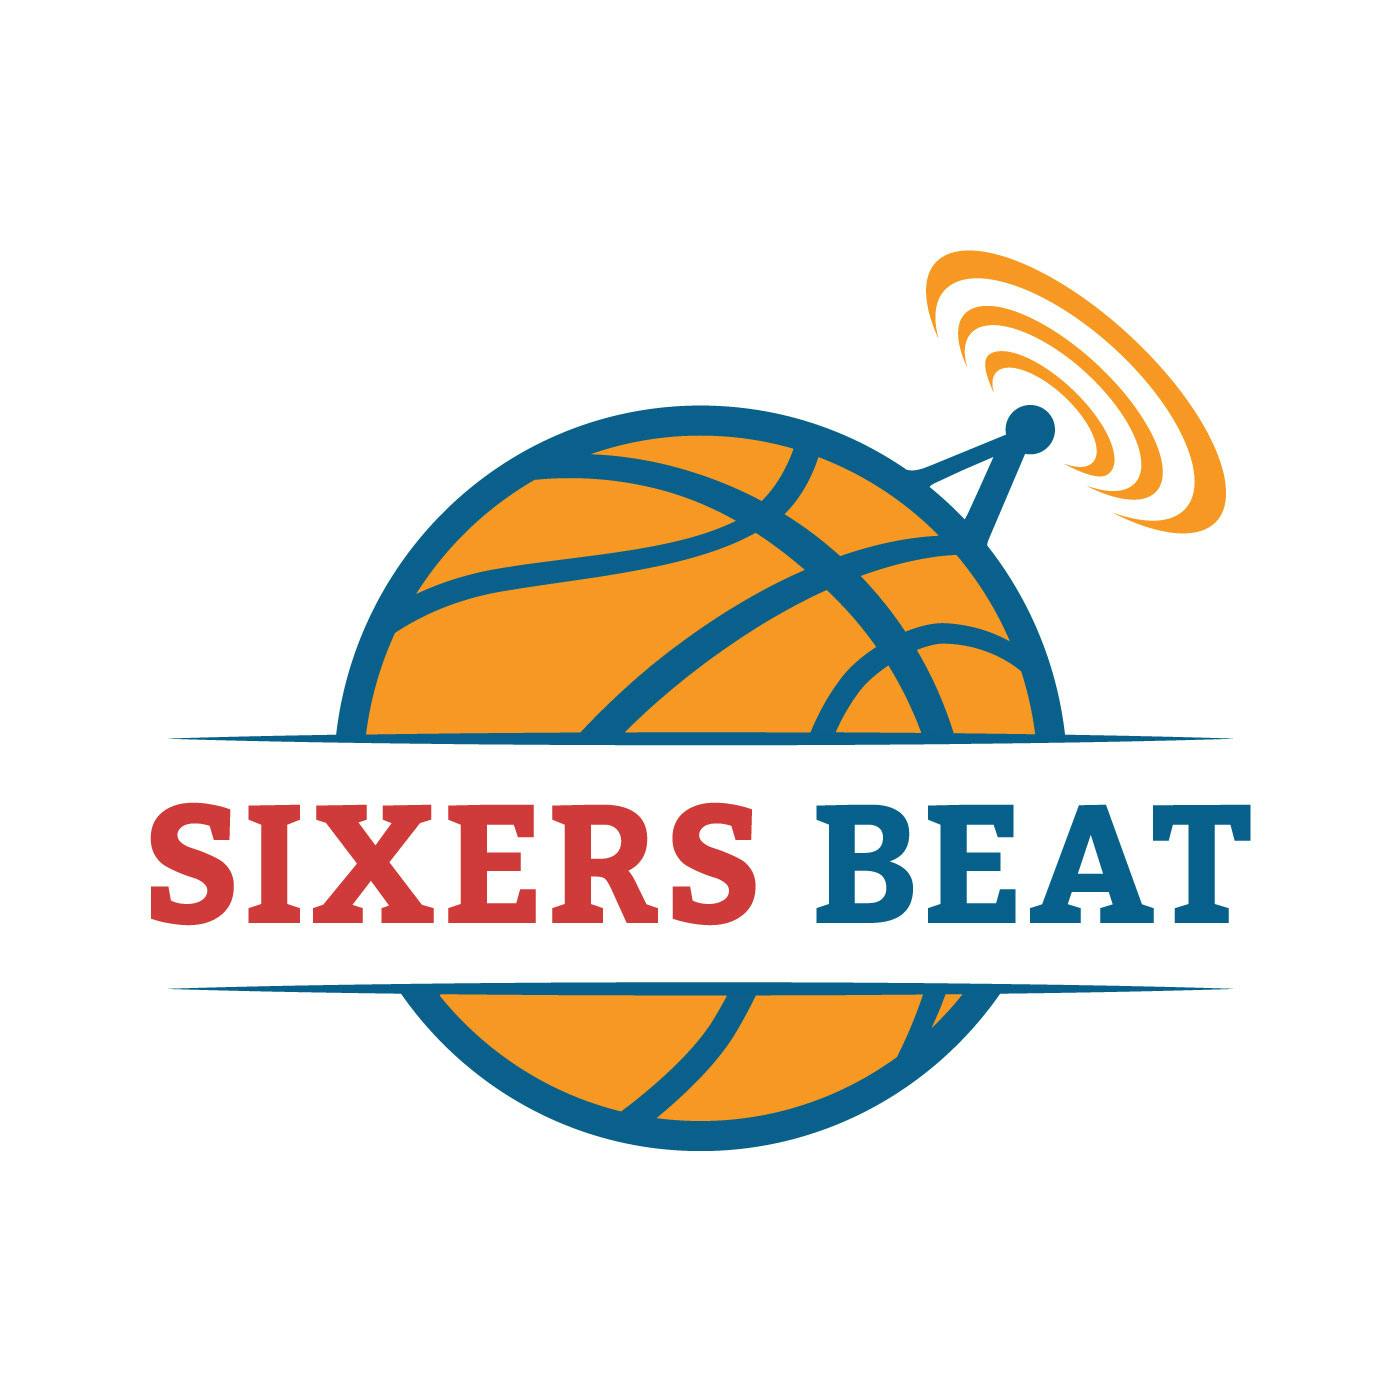 Sixers off to a 2-1 start to the season